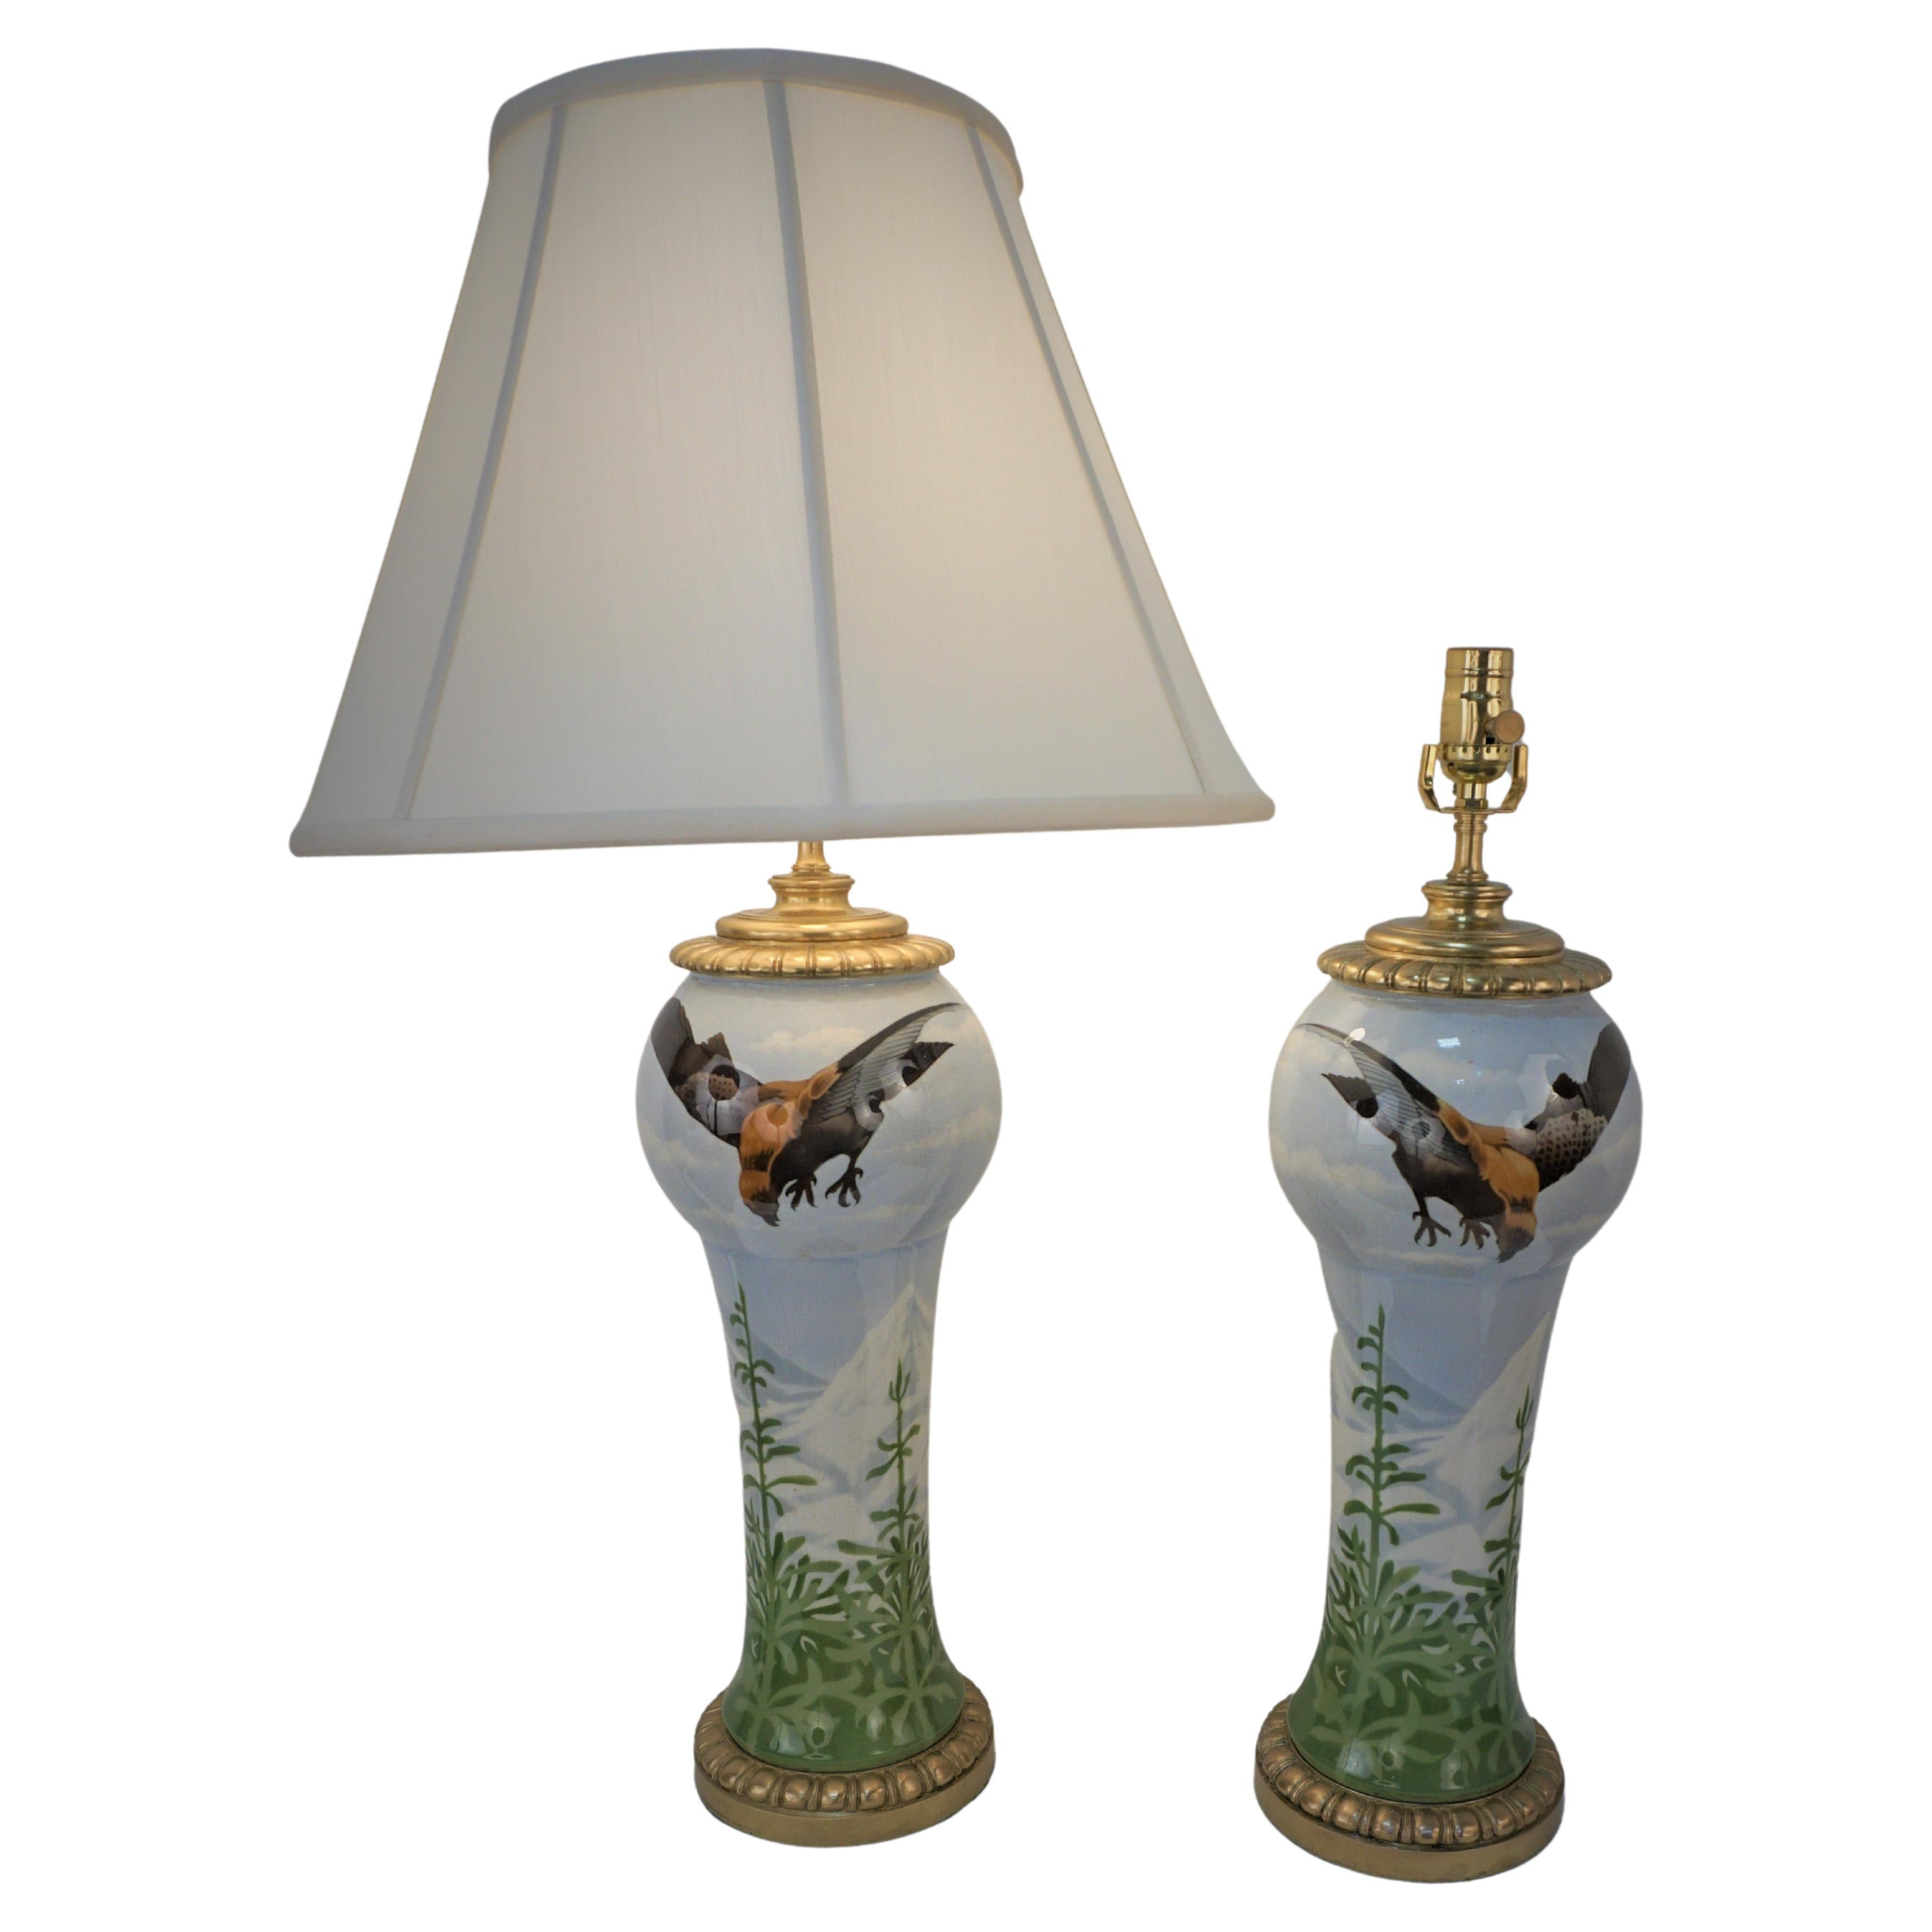 Pair of 1930's Hand Painted Porcelain Table Lamps by Charles Catteau Belgium